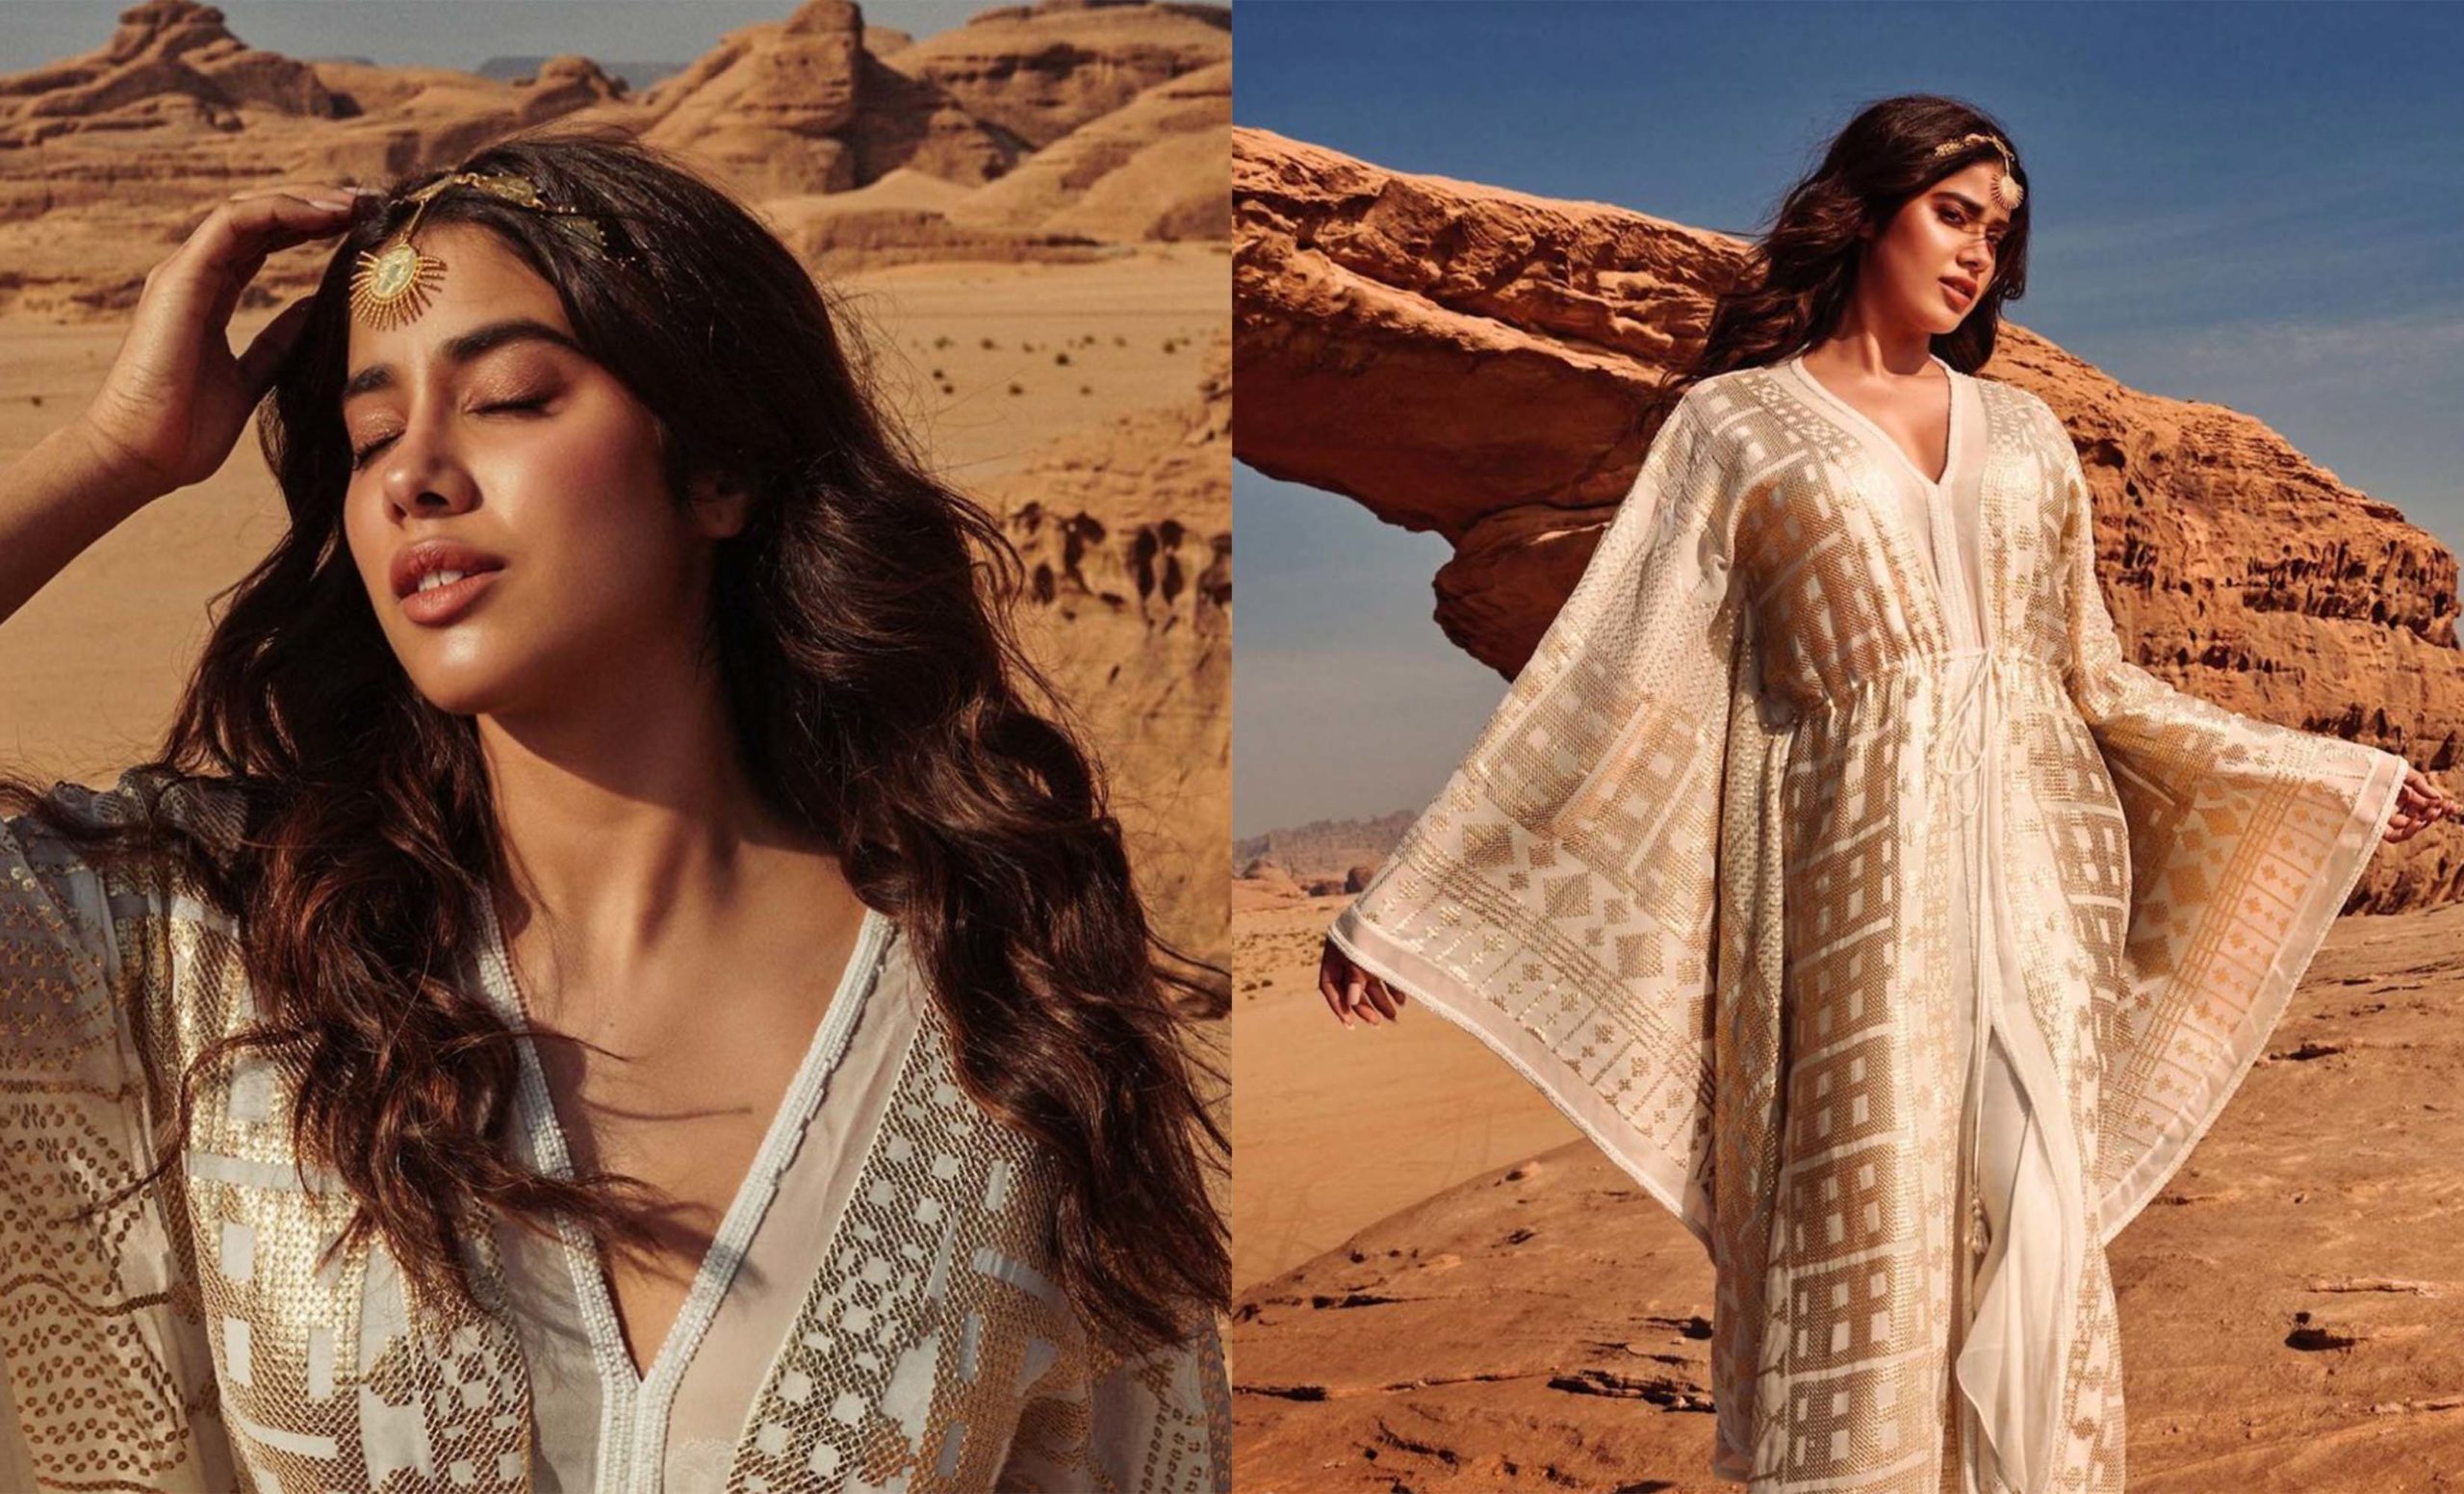 Janhvi Kapoor Stuns In An Ivory Manish Malhotra Kaftan And We Can’t Help But Stare In Awe!